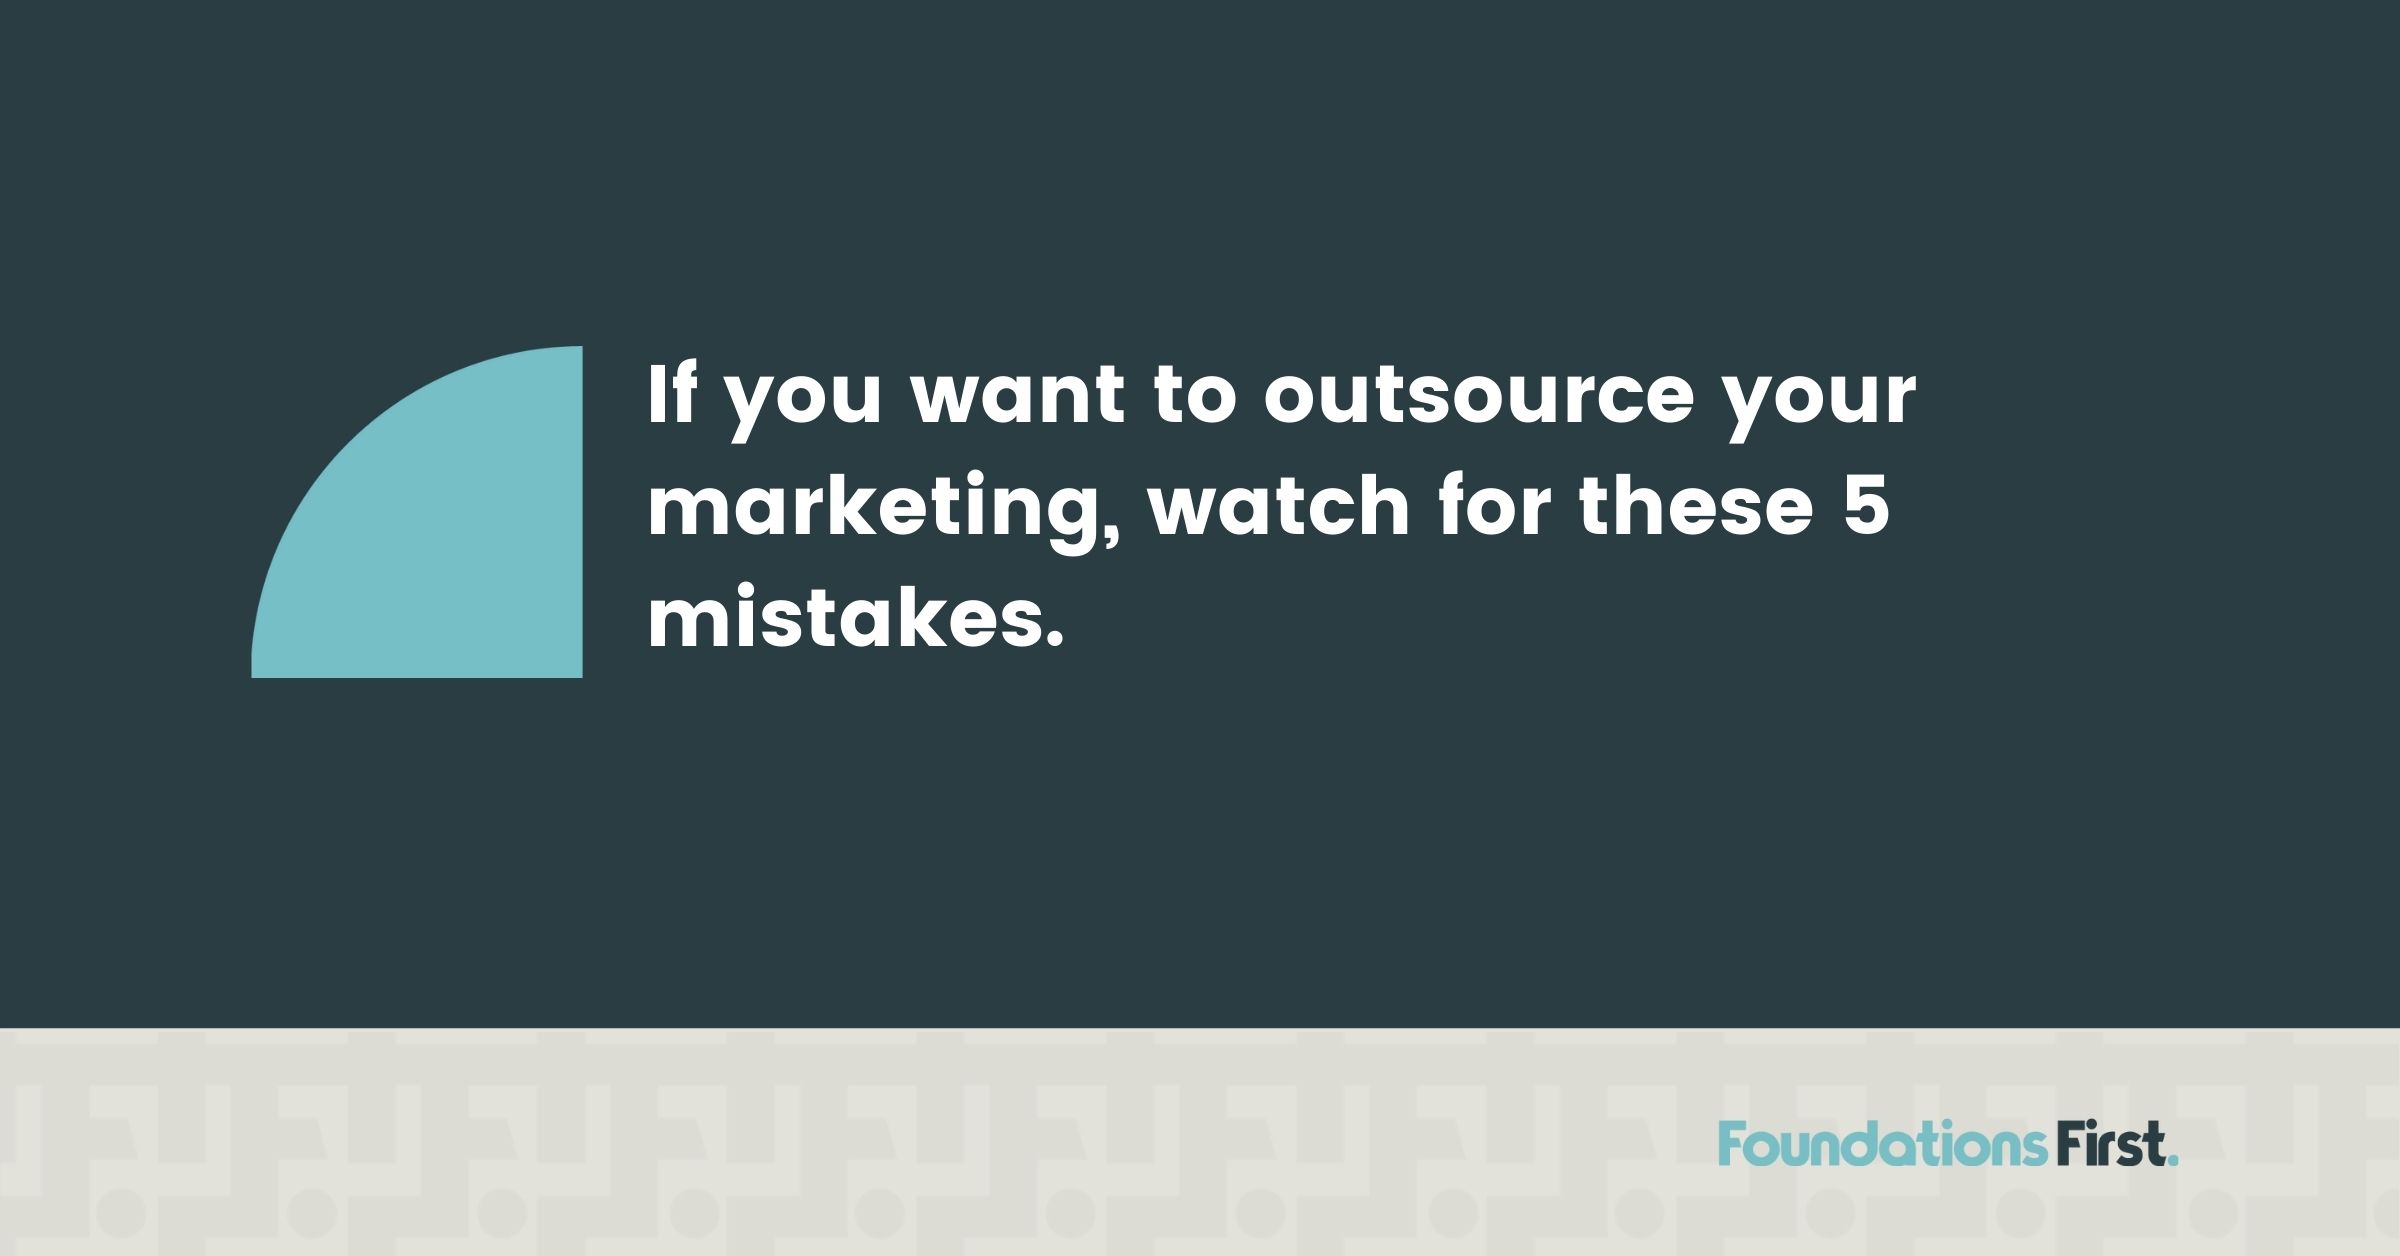 5 Mistakes to Avoid if You Outsource Marketing